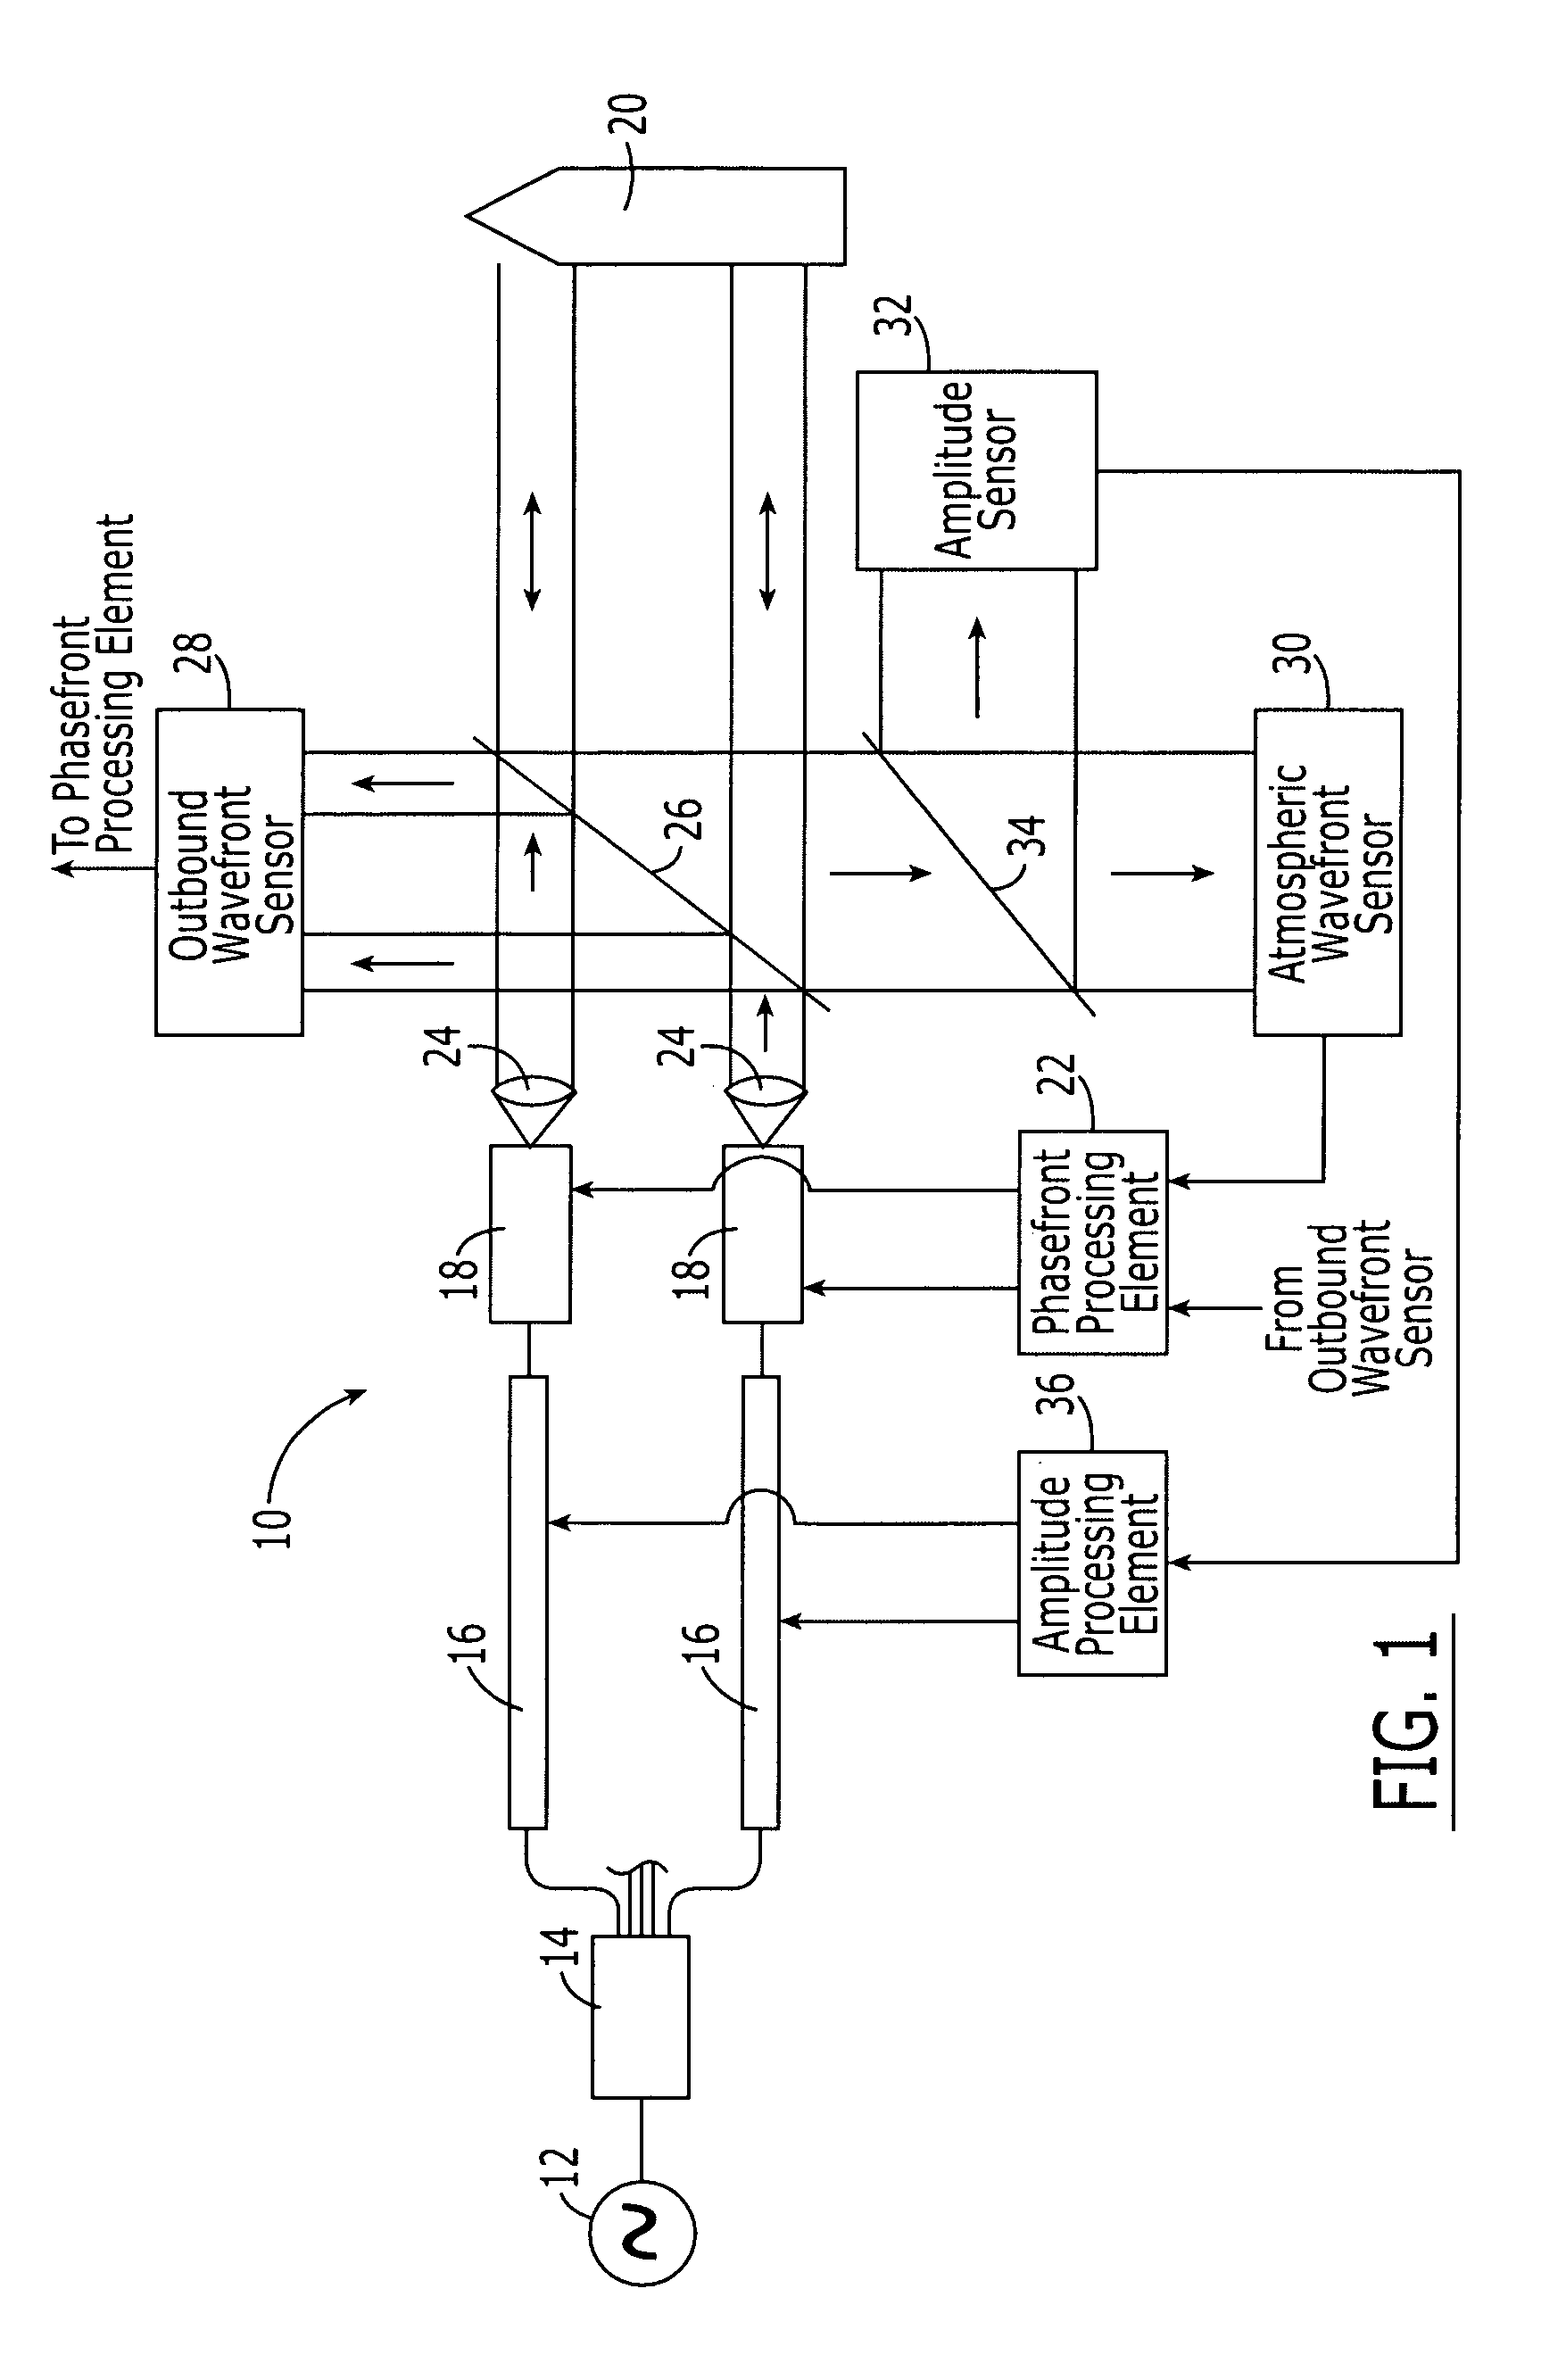 Fiber optic phased array and associated method for accommodating atmospheric perturbations with phase and amplitude control